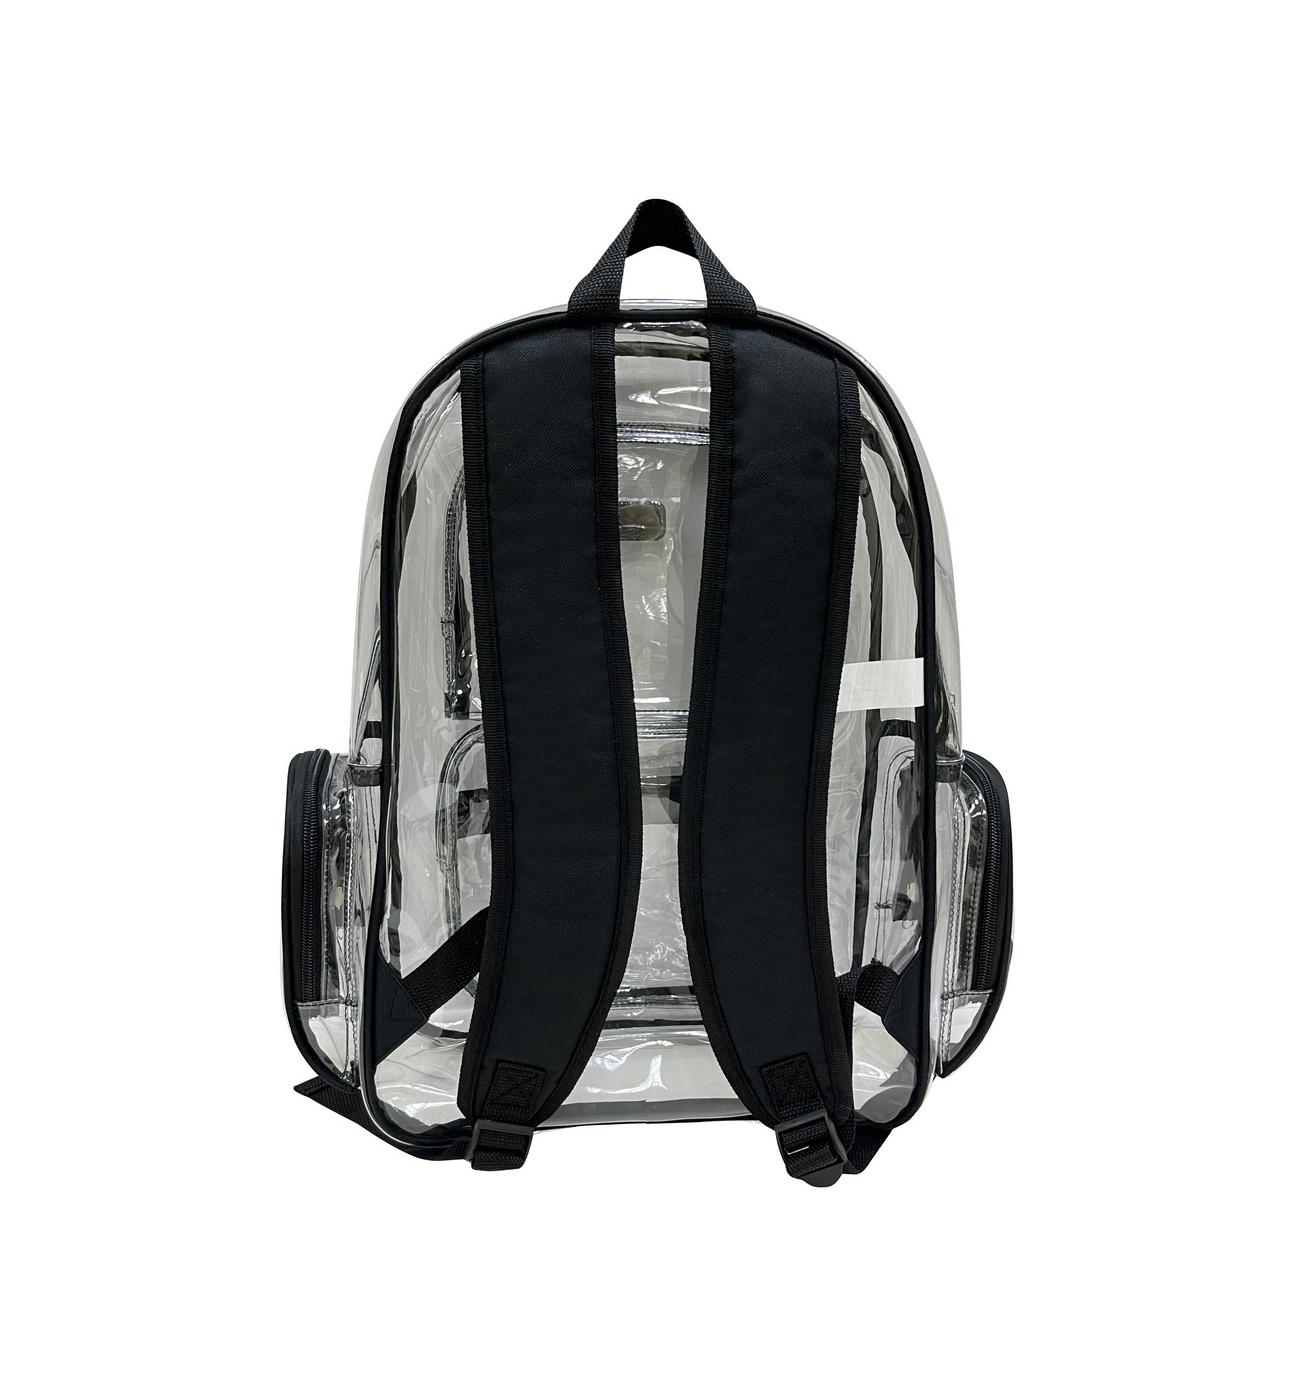 Tech Gear Clear Backpack with Trim - Black; image 3 of 3